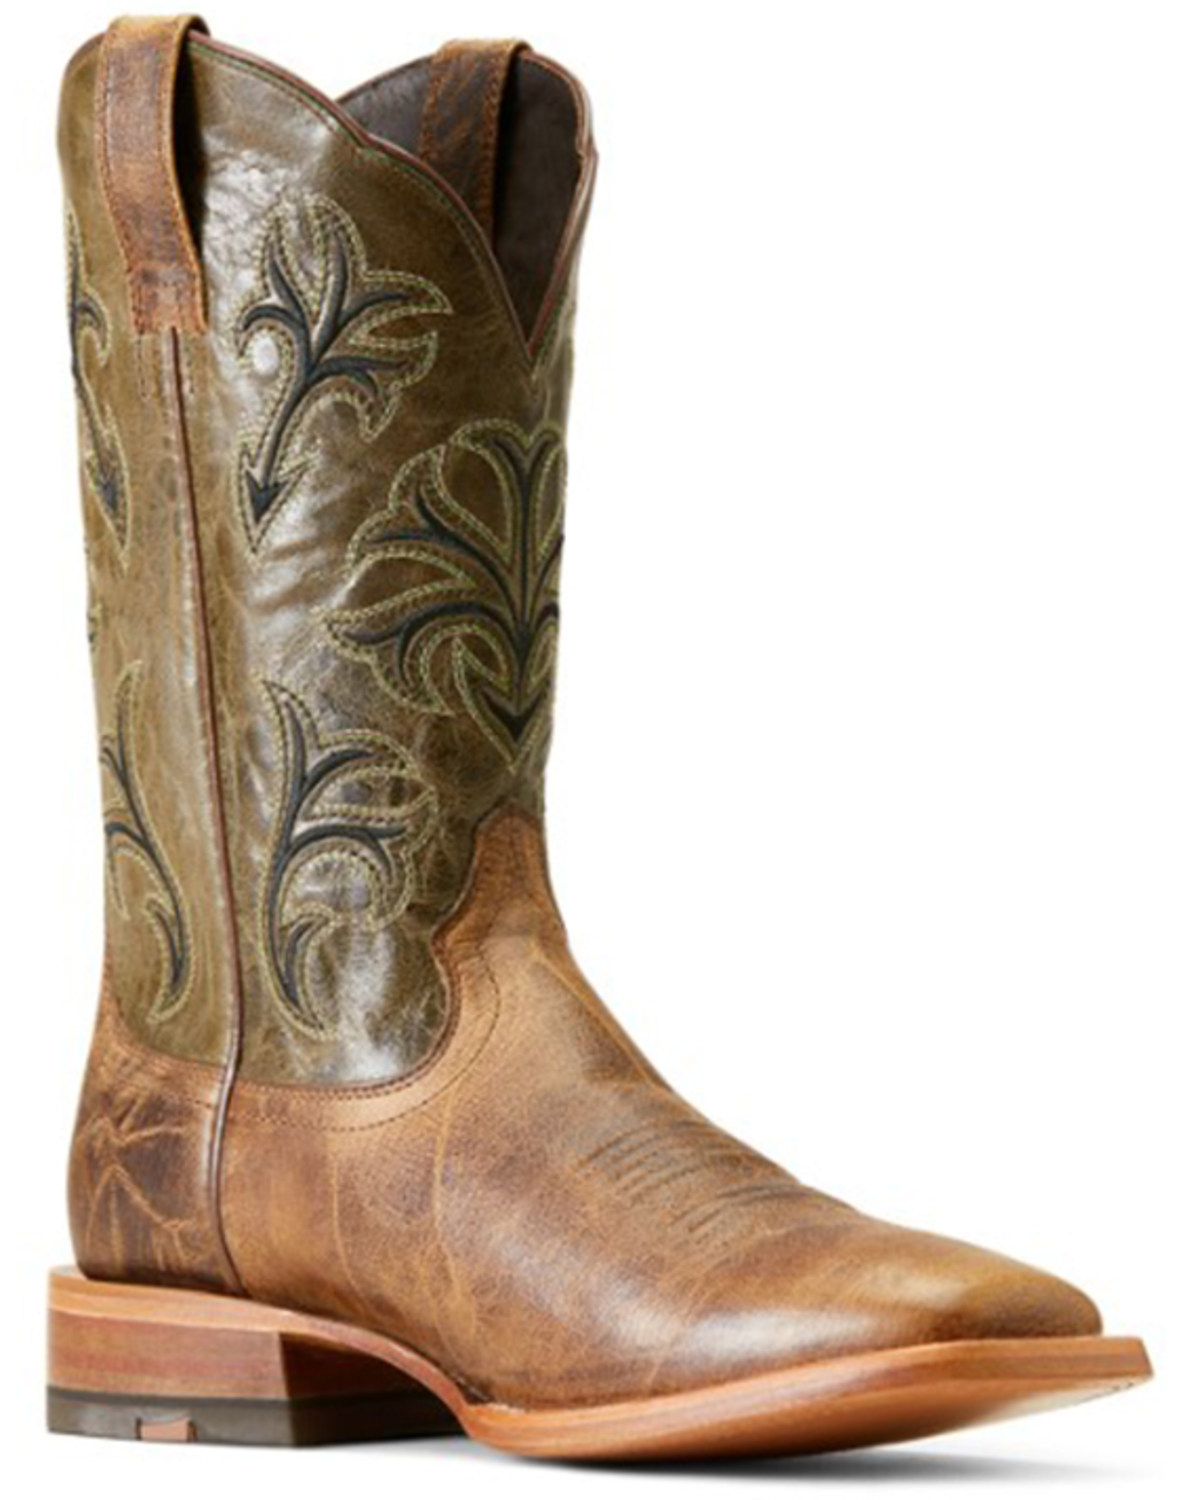 Ariat Men's Cowboss Western Boots - Broad Square Toe